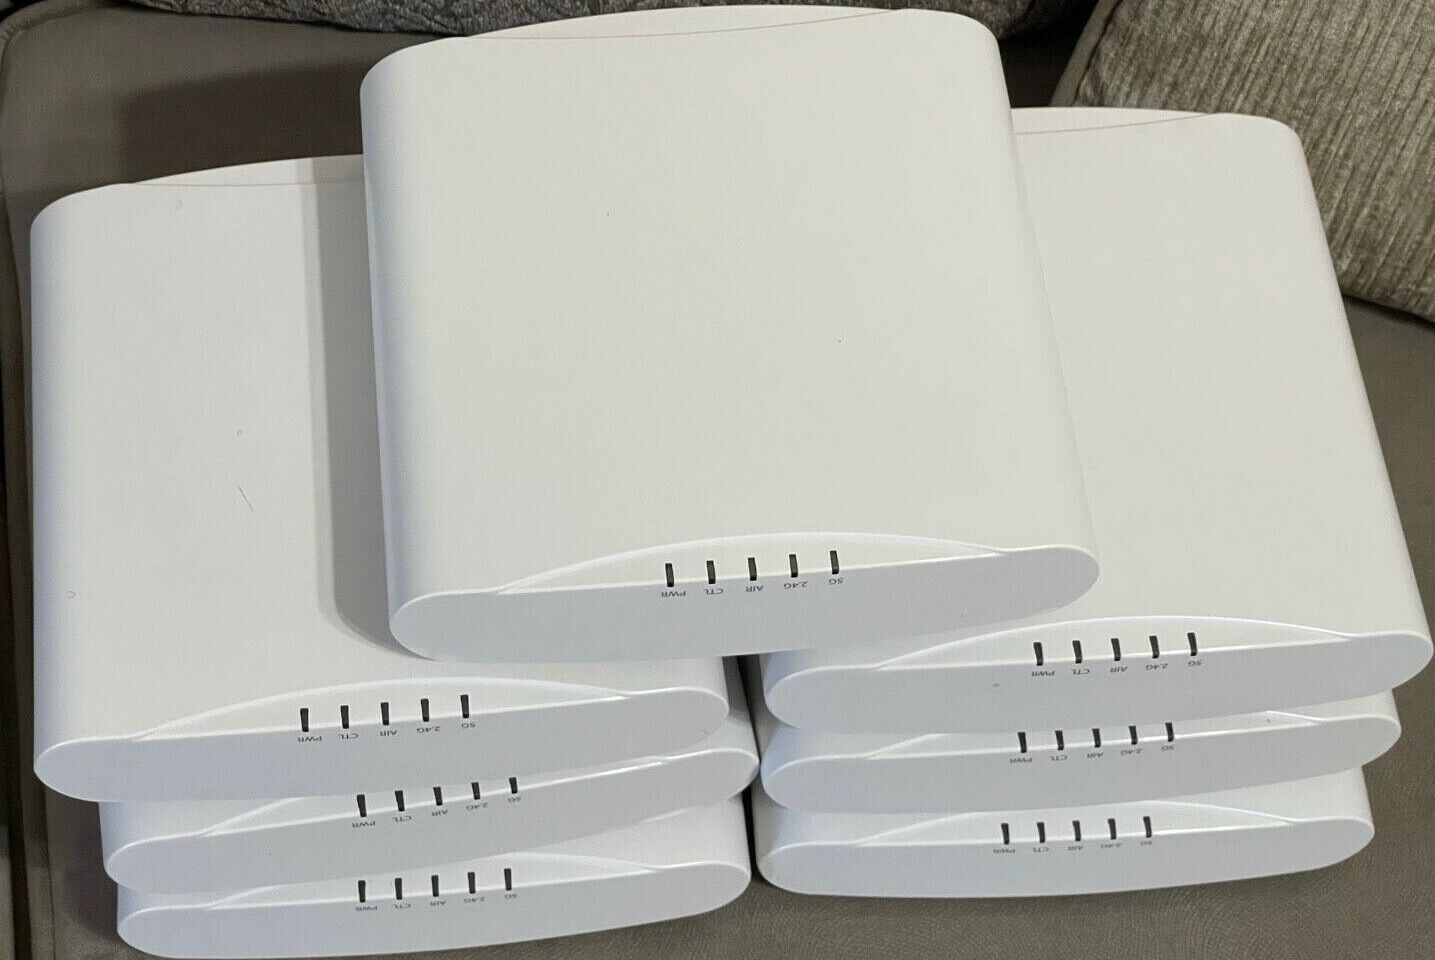 Unleashed Ruckus R610 Unleashed High Performance Wave 2 Wireless Access Point